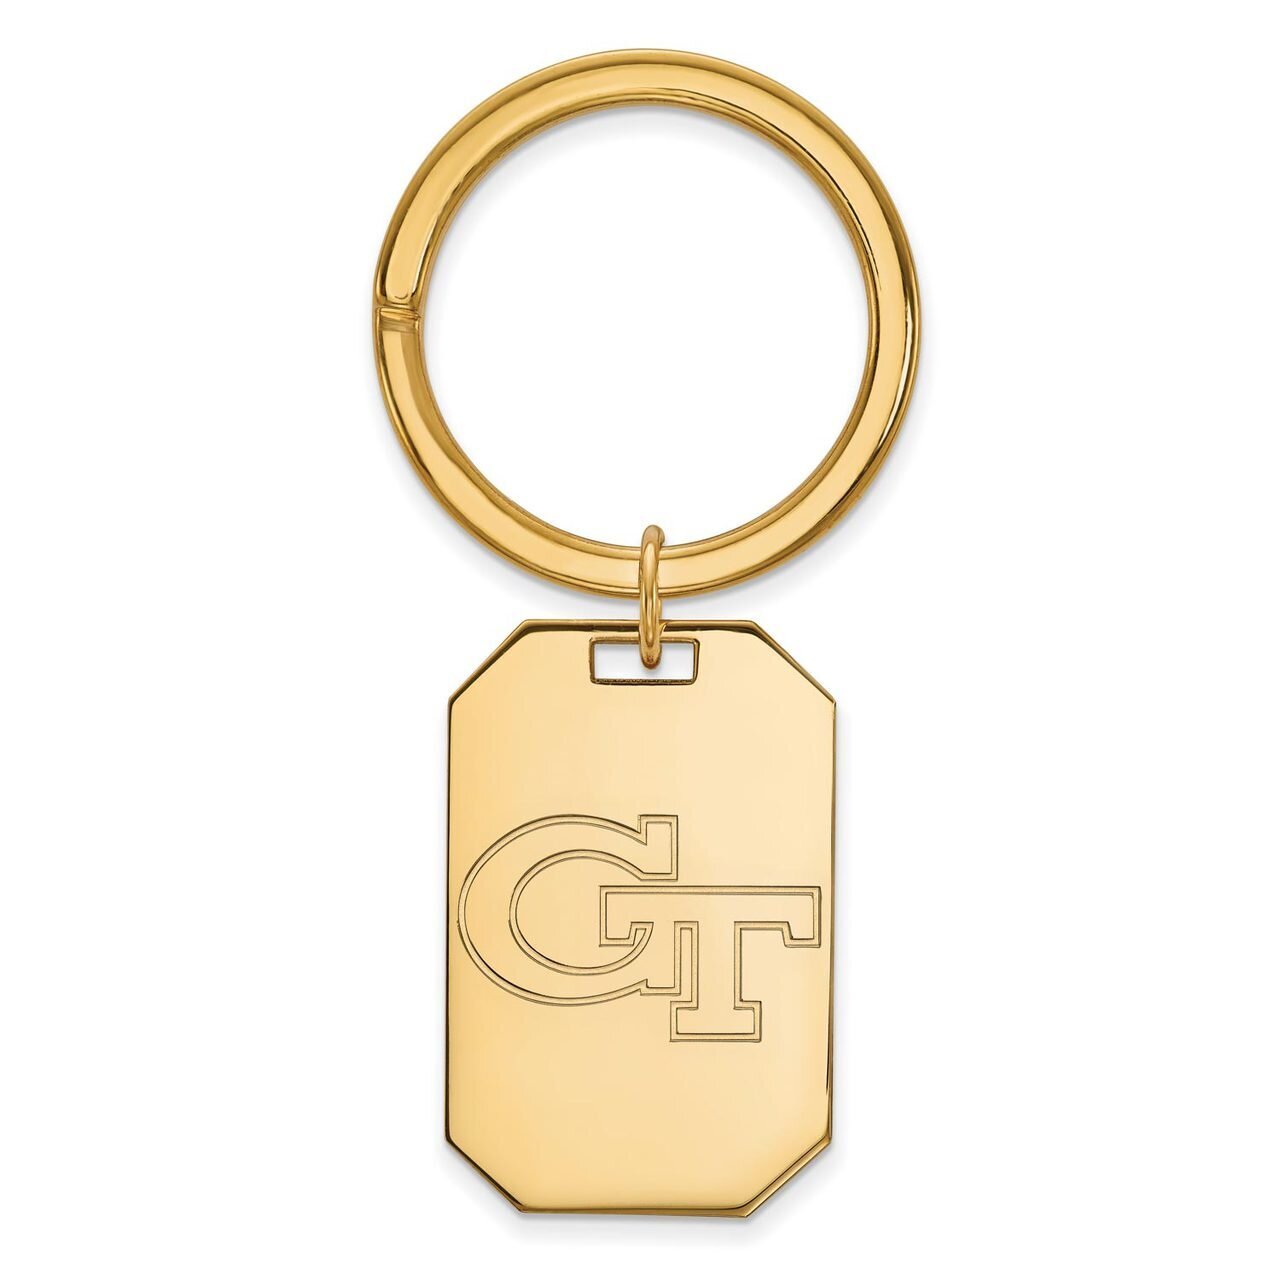 Georgia Institute of Technology Key Chain Gold-plated Silver GP020GT